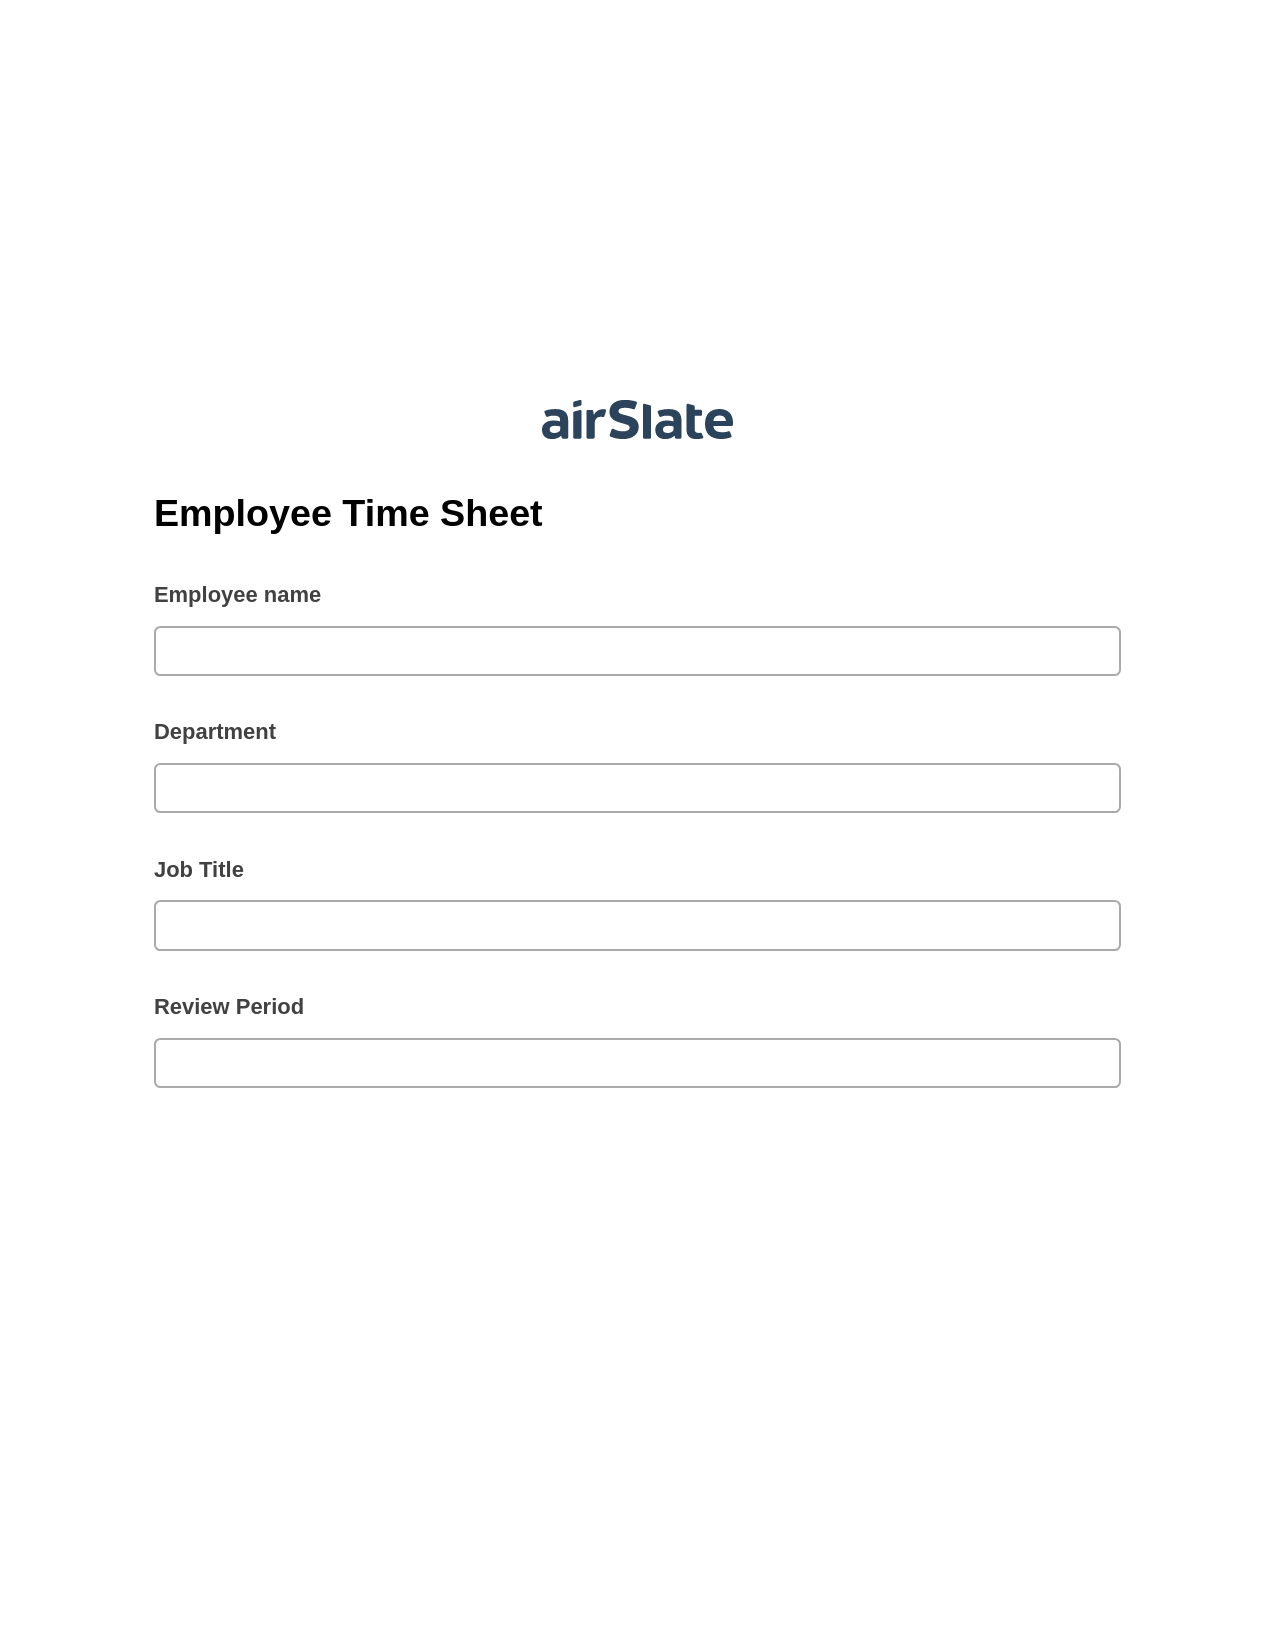 Employee Time Sheet Pre-fill from Excel Spreadsheet Bot, Create slate bot, Export to WebMerge Bot